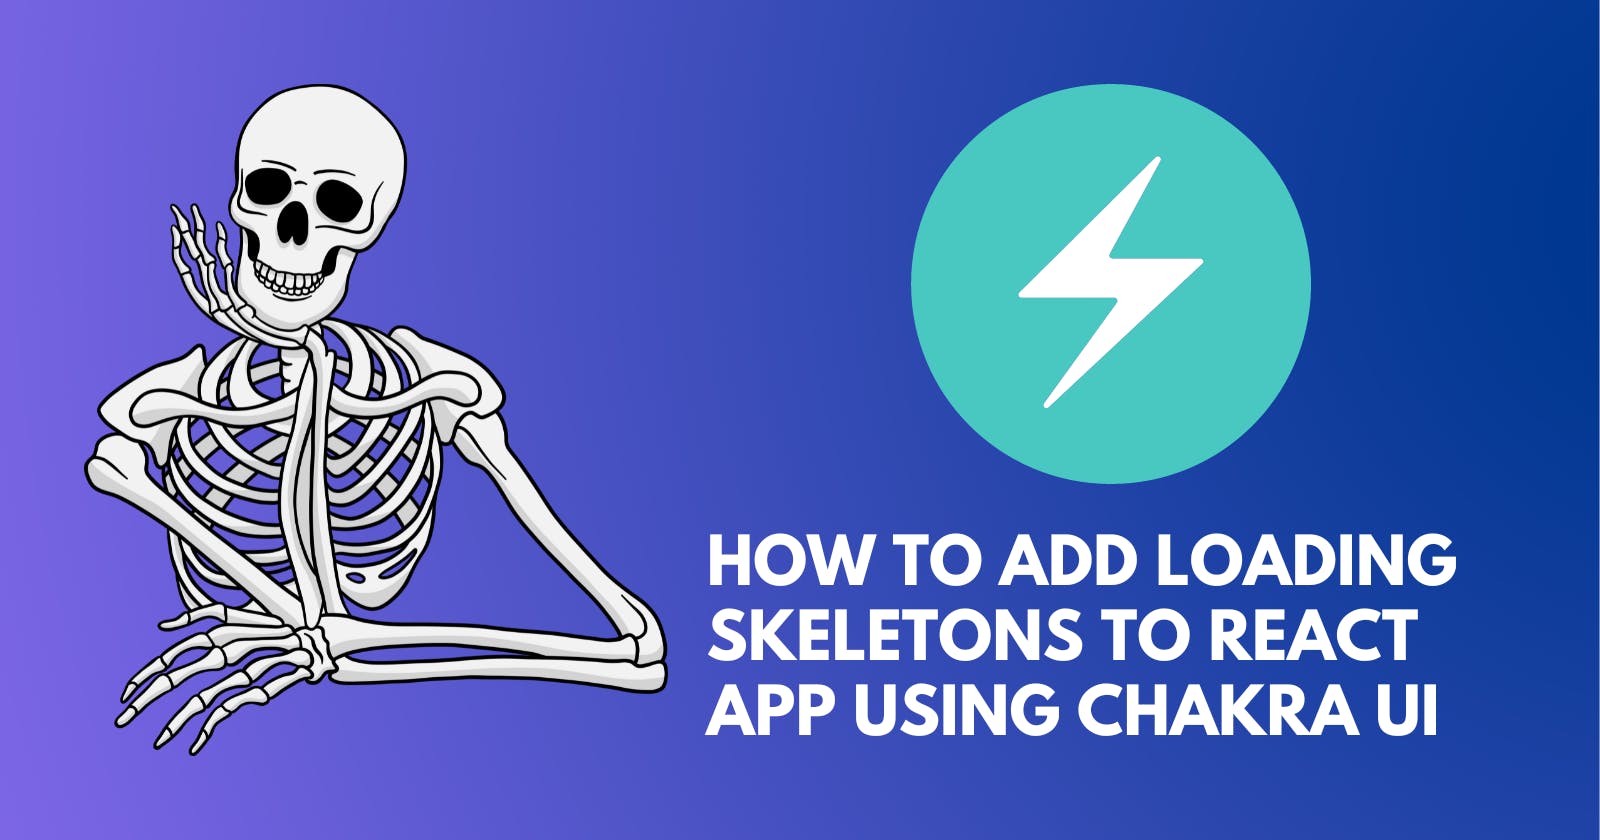 How to Add Loading Skeletons to React App Using Chakra UI